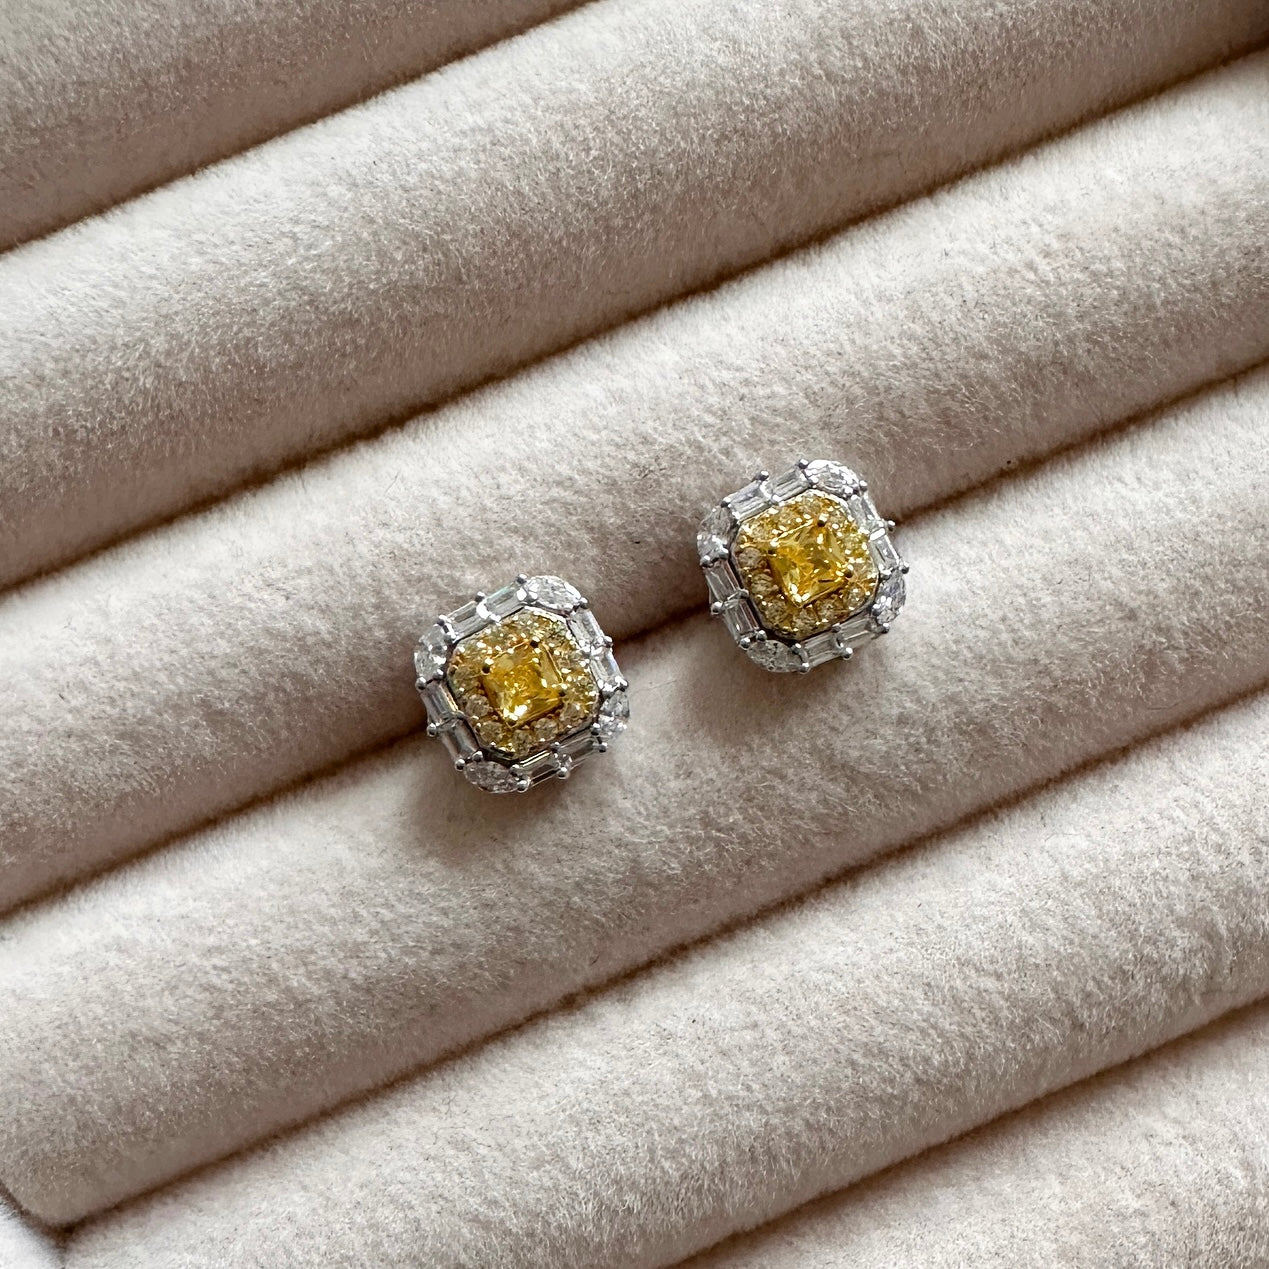 Glimmer with the Alex stud earrings, crafted with luxurious sterling silver and embellished with a luminous honey crystal centre. Adorned with an array of CZ crystals, these earrings will lend a sophisticated sparkle to any look. Earring drop 1.5cm